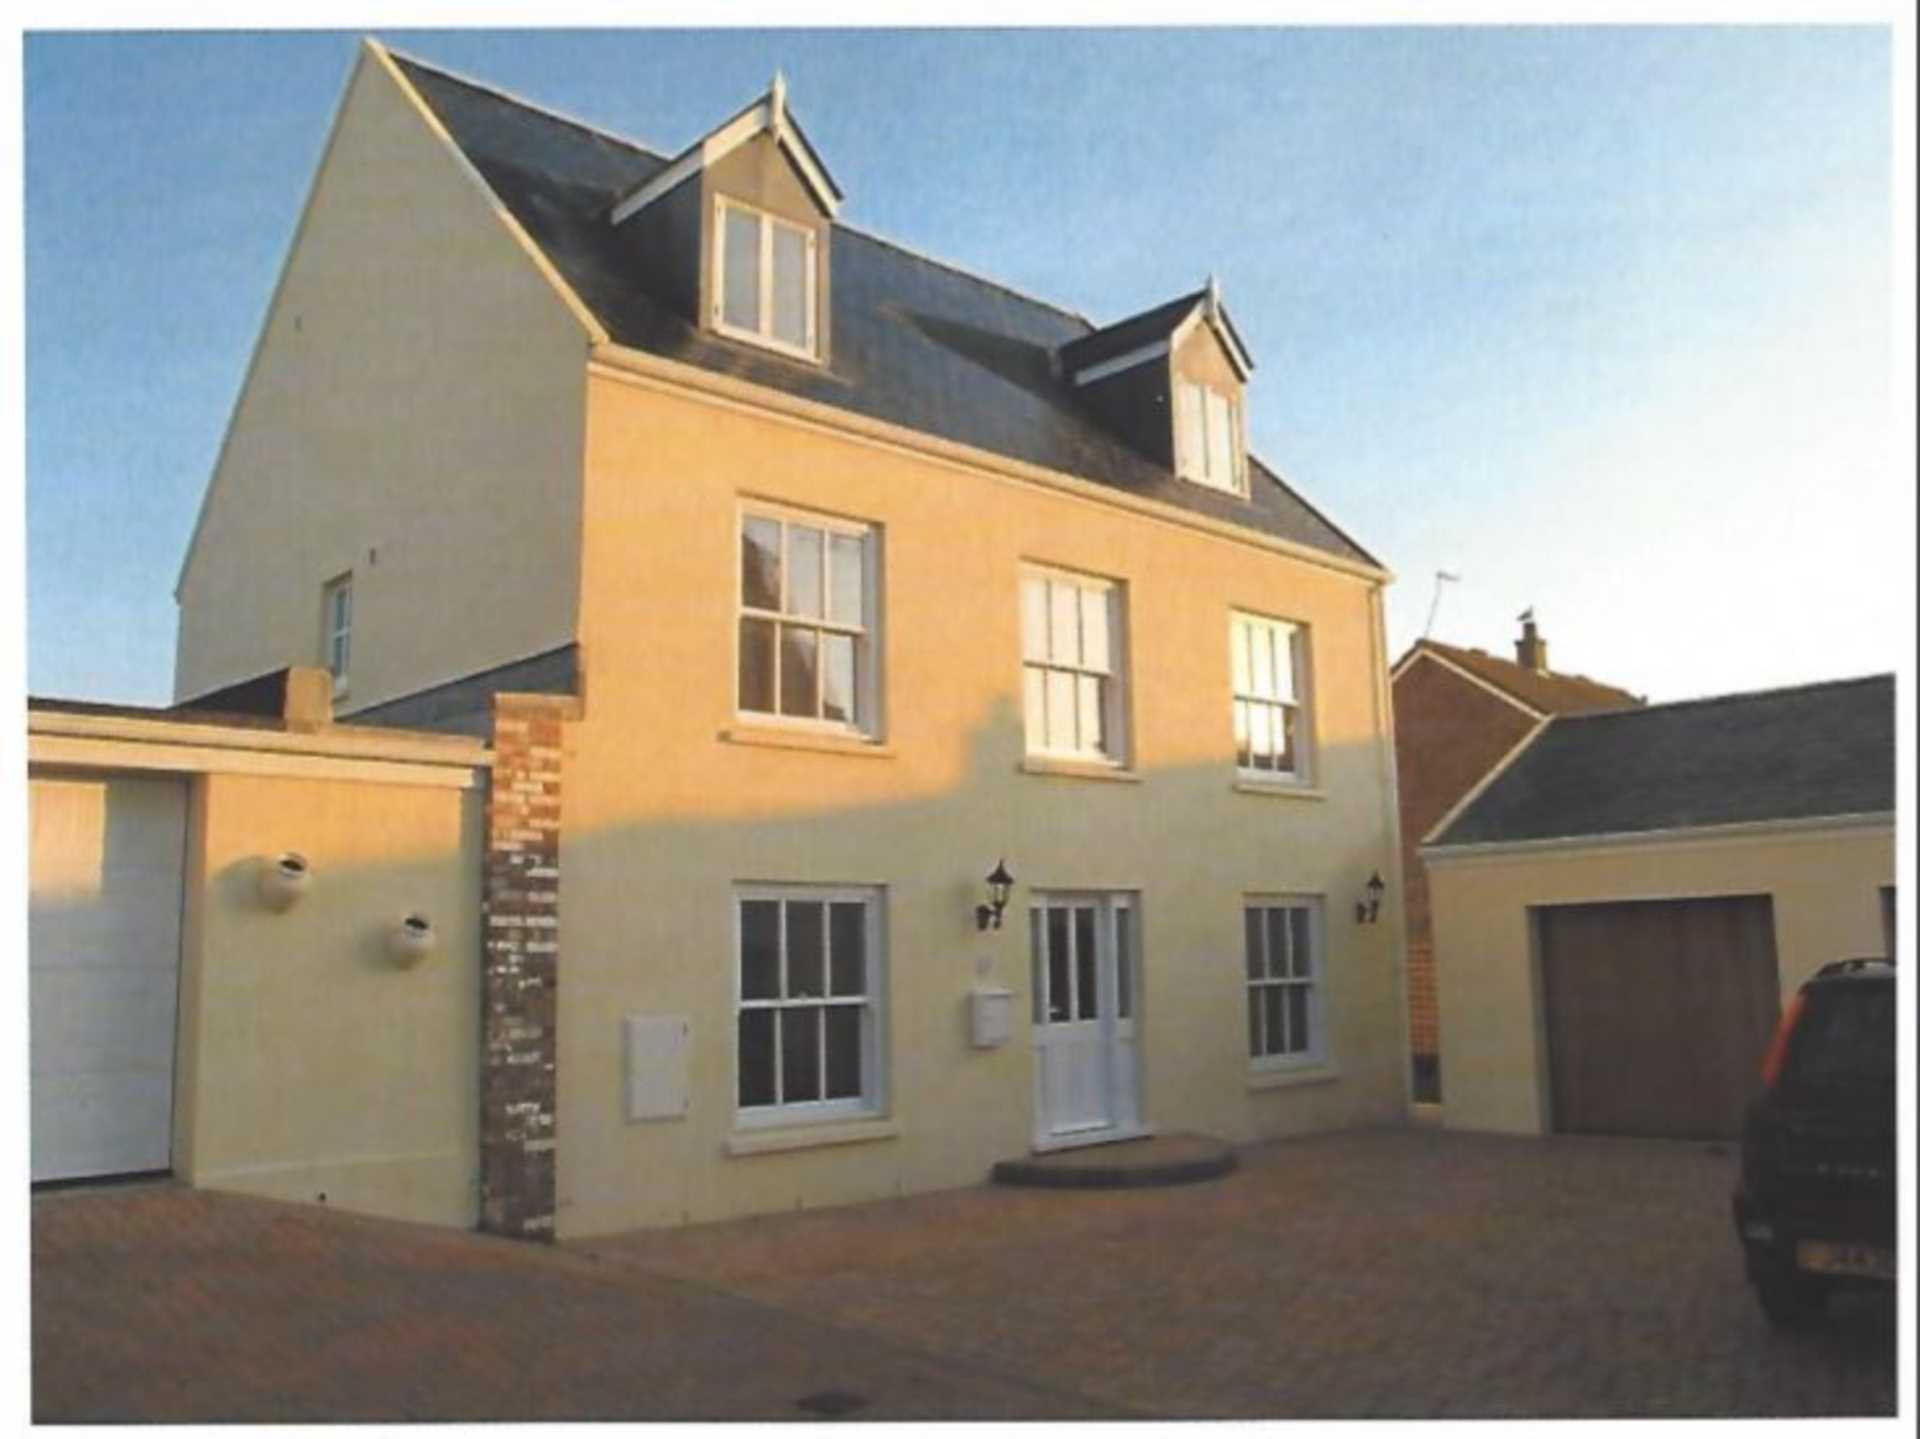 ST CLEMENT SOLE AGENT A FANTASTIC 5 BEDROOM 4 BATHROOM, ST